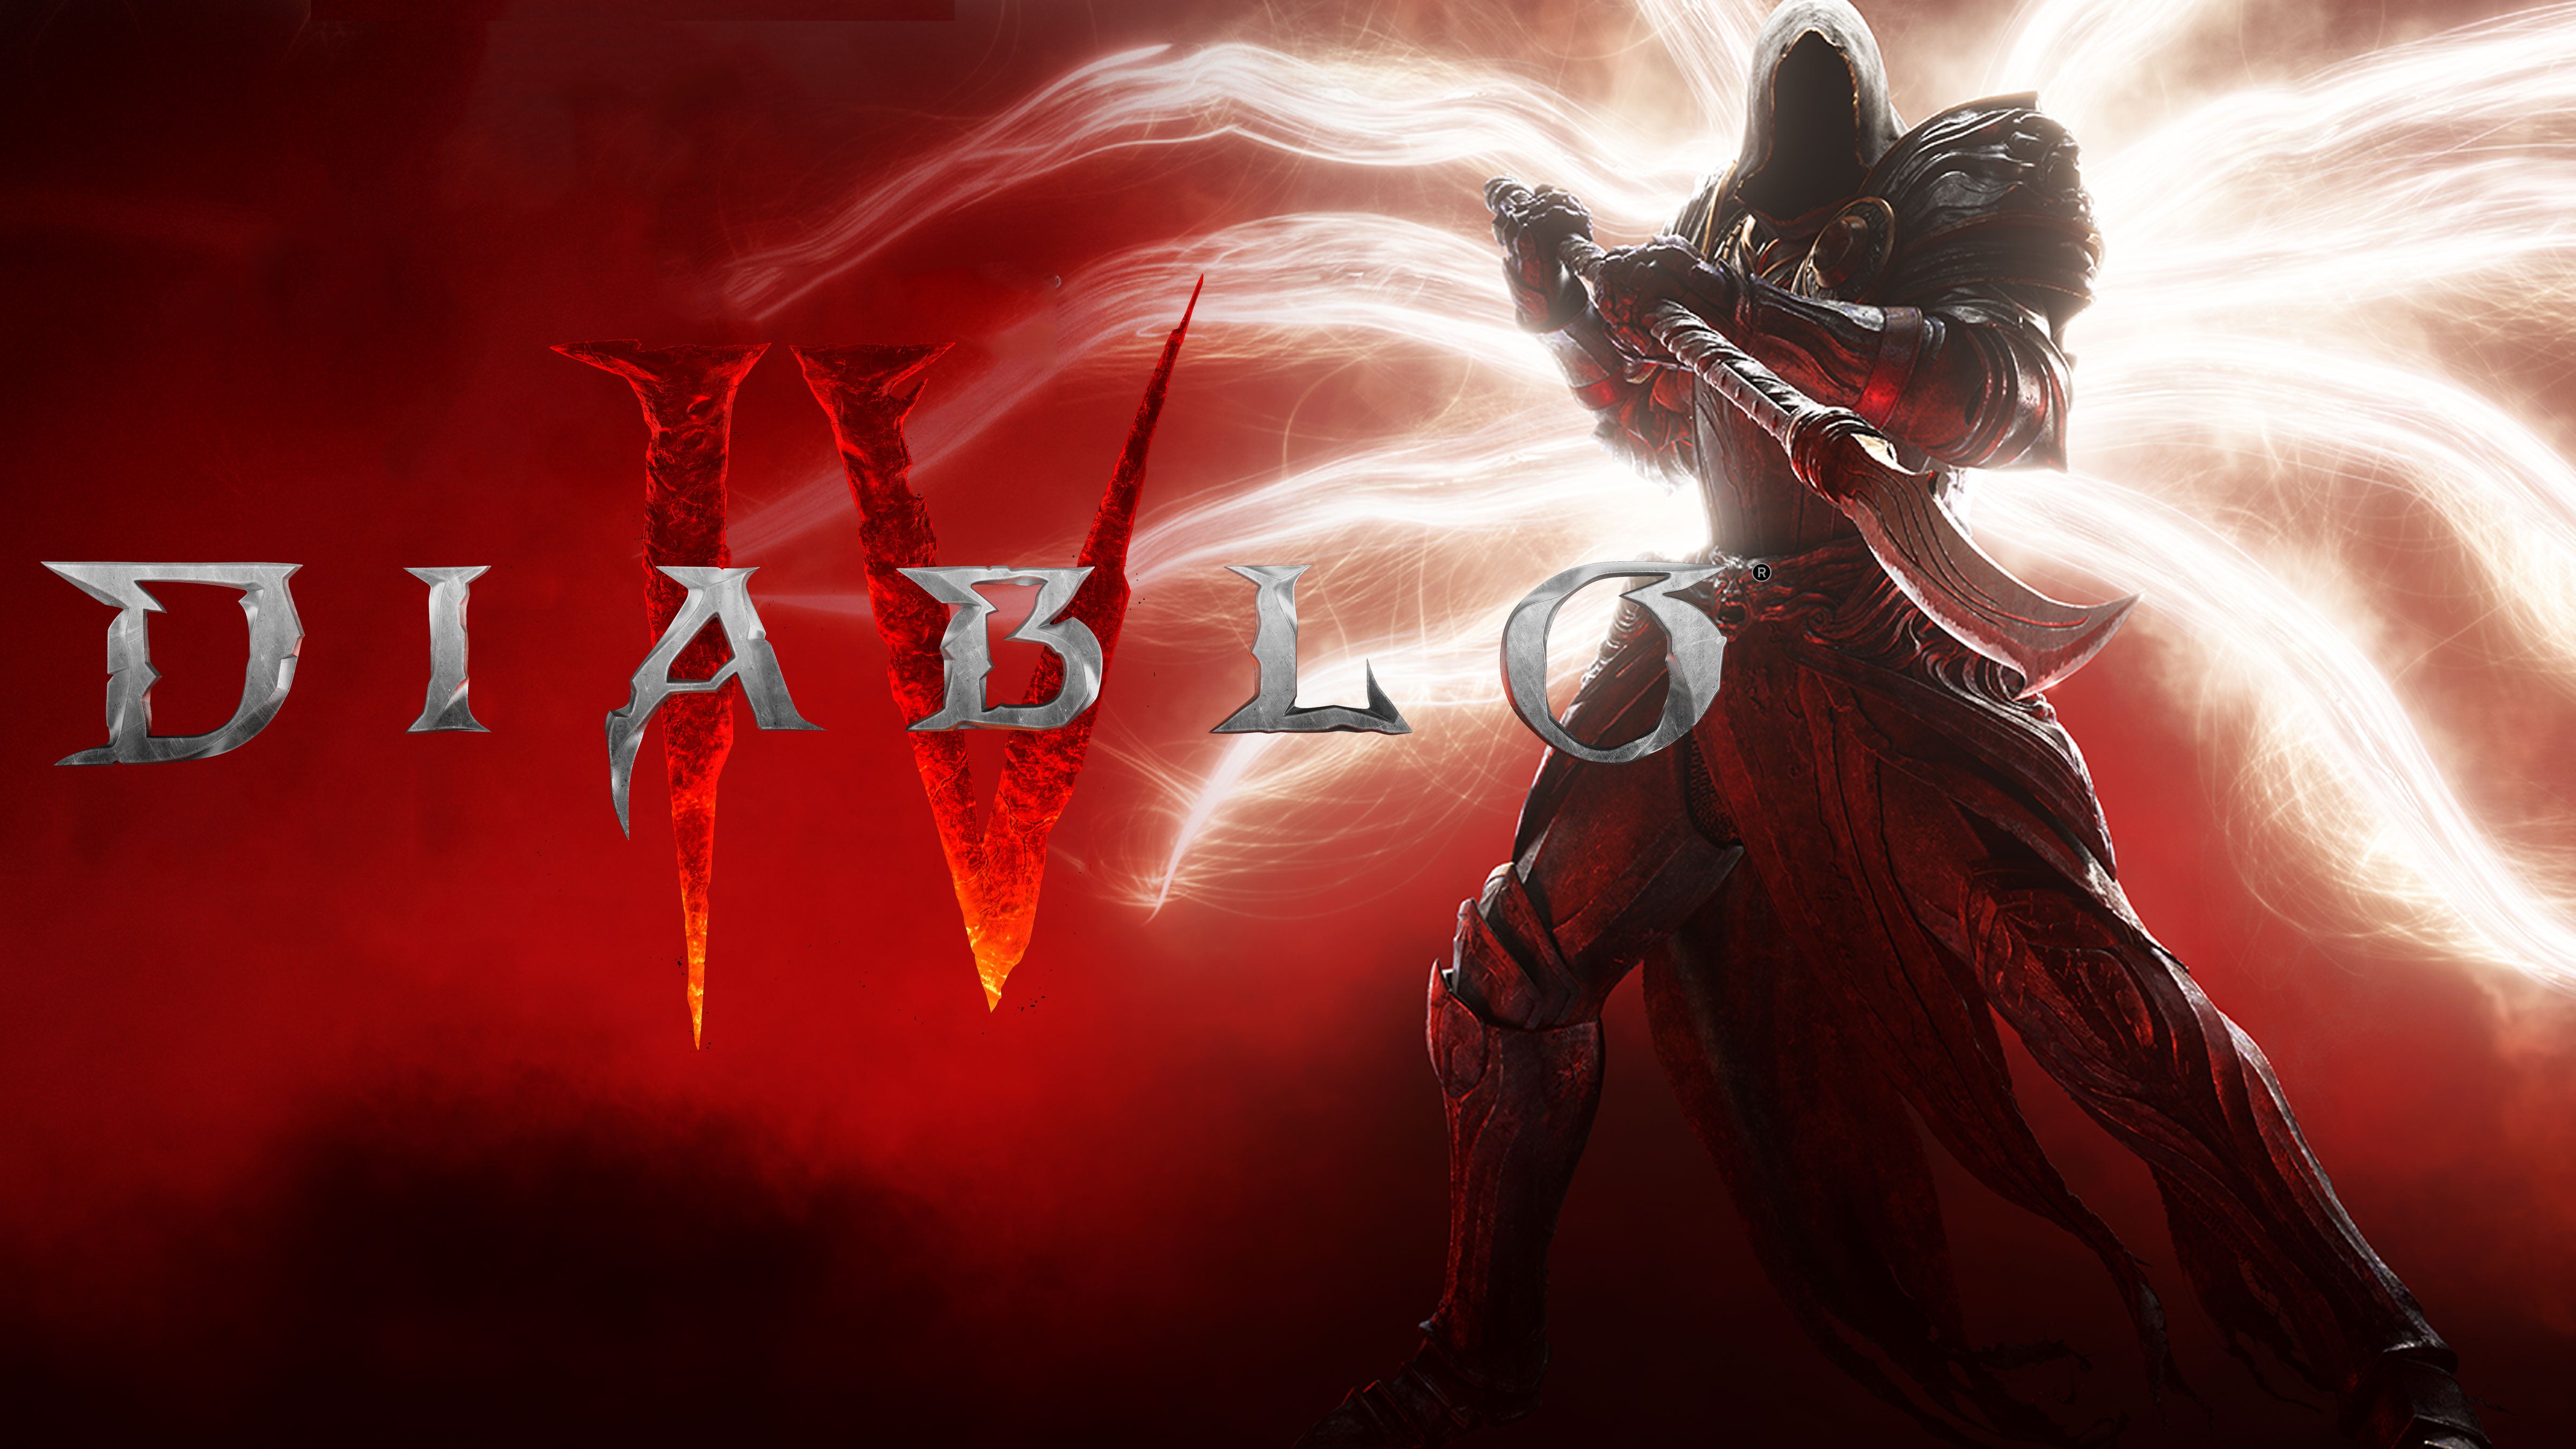 Artwork showing a character holding a weapon alongside a red background and the Diablo 4 logo.